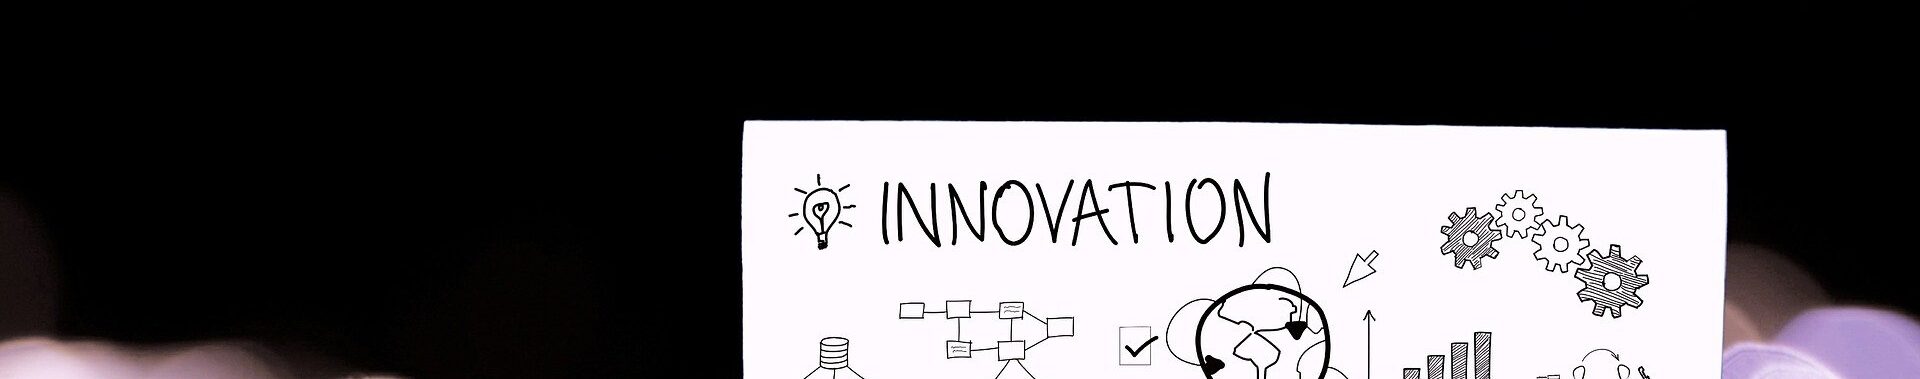 Create and manage an environment that promotes innovation